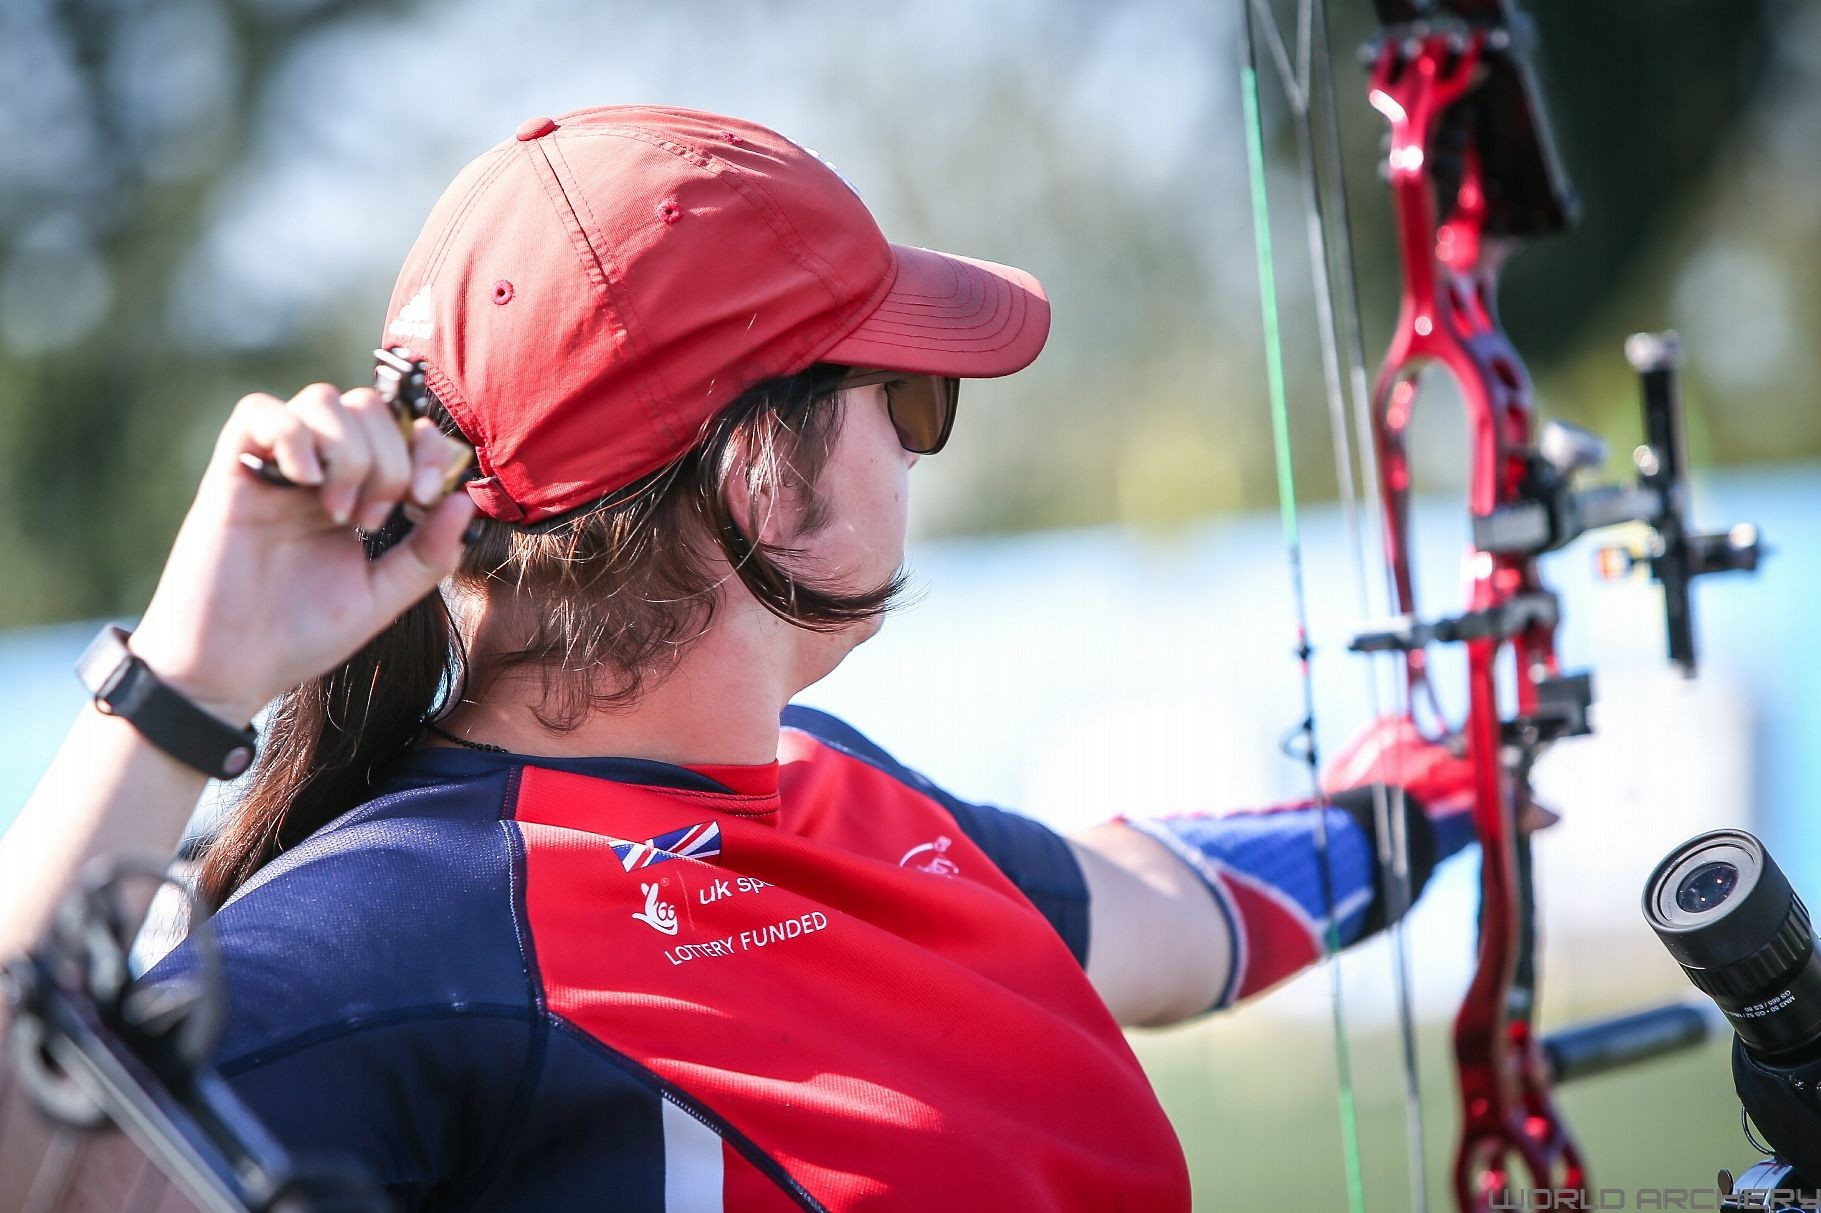 Rio 2016 champion Jessica Stretton scored 657 out of a possible 720 points today ©World Archery